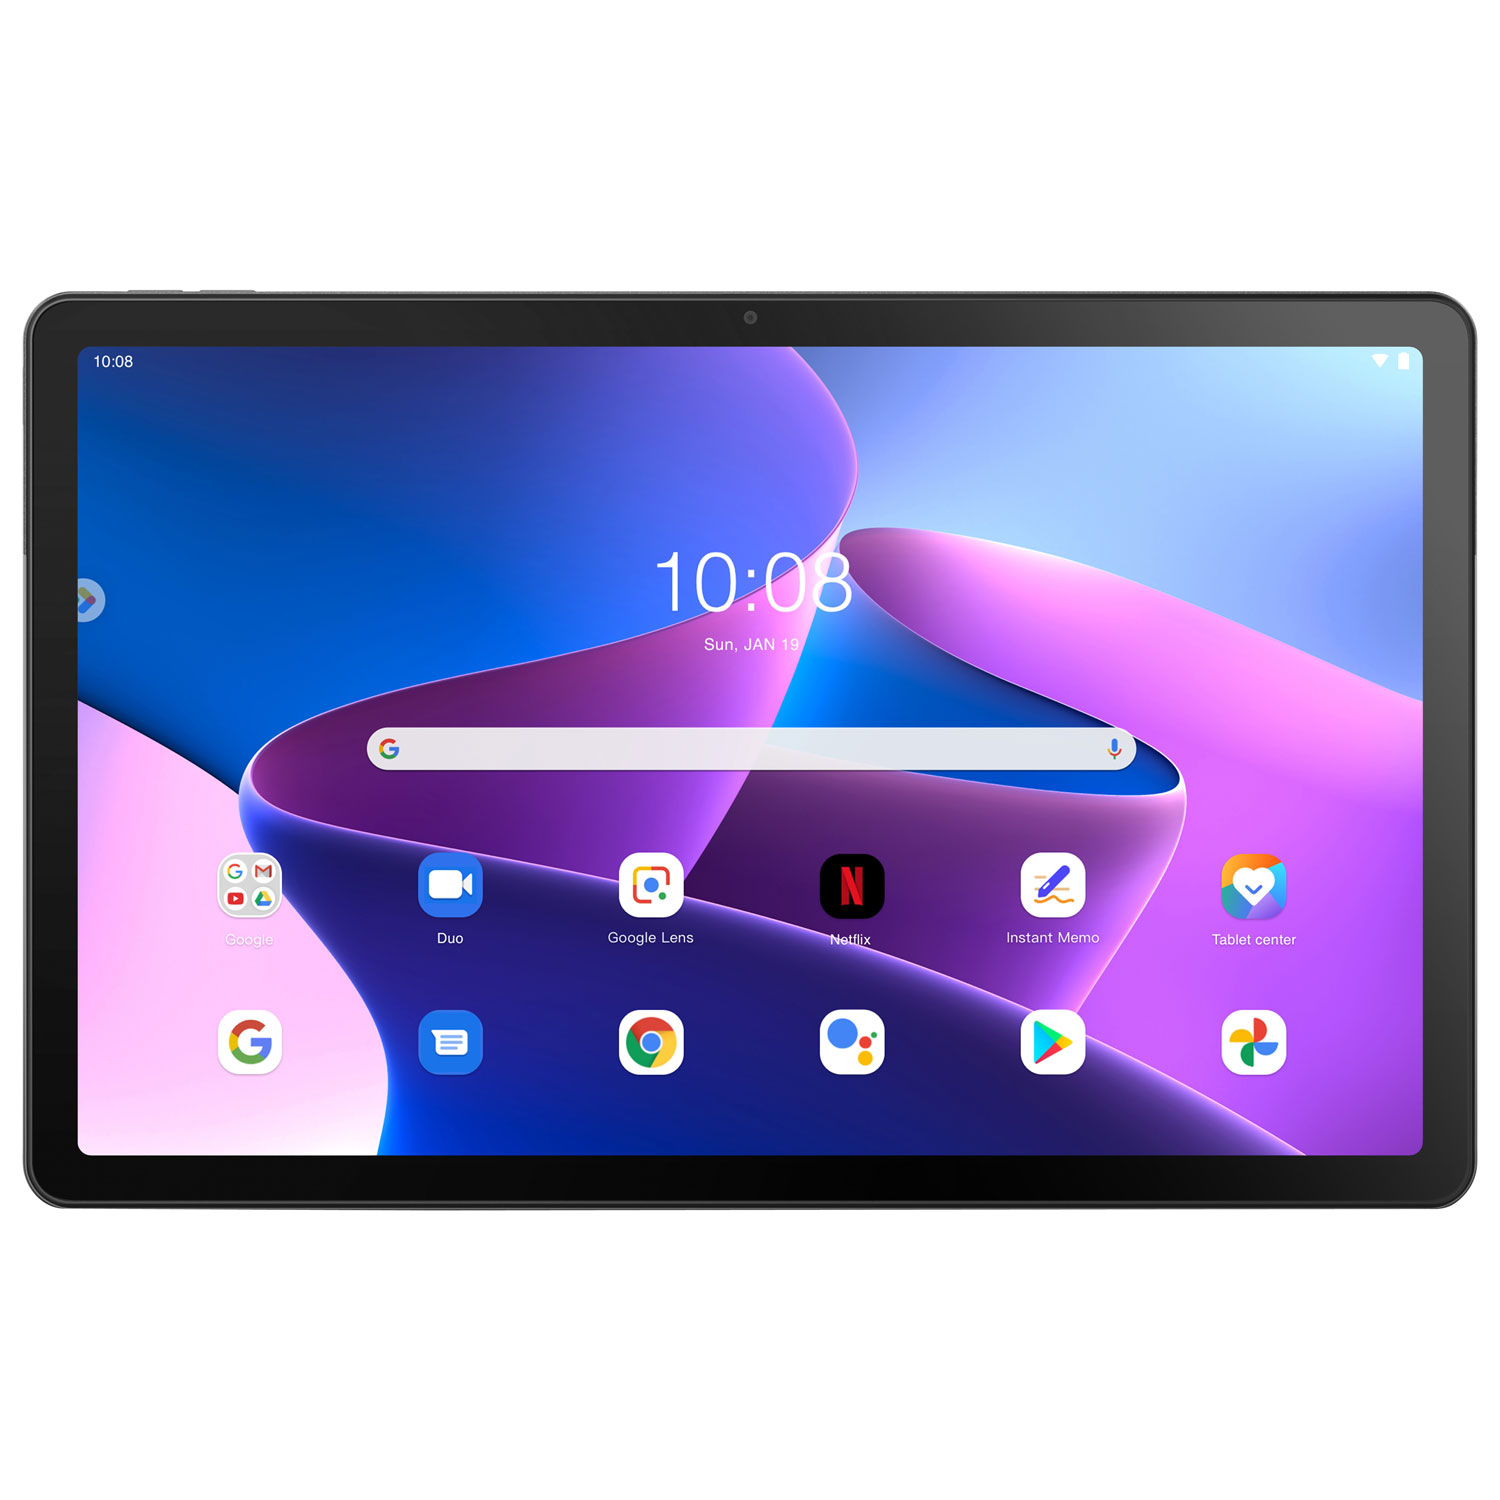 Lenovo Tab M10 Plus 10.6" 32GB Android 12 S Tablet with MediaTek G80 8-Core Processor - Storm Grey